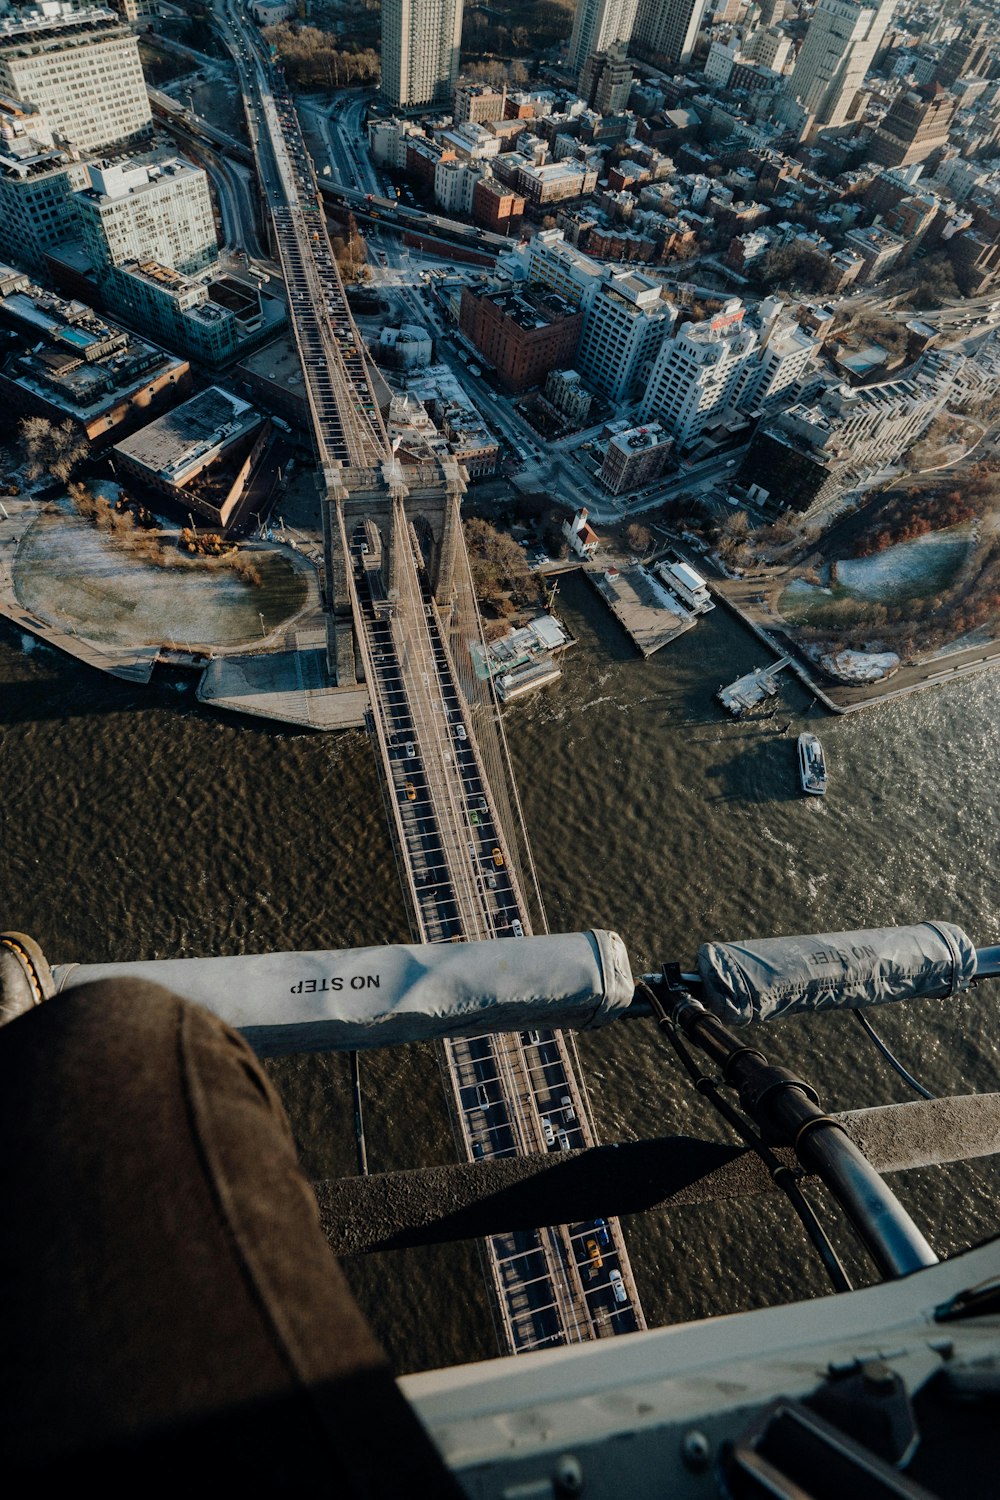 a view of a bridge from a helicopter